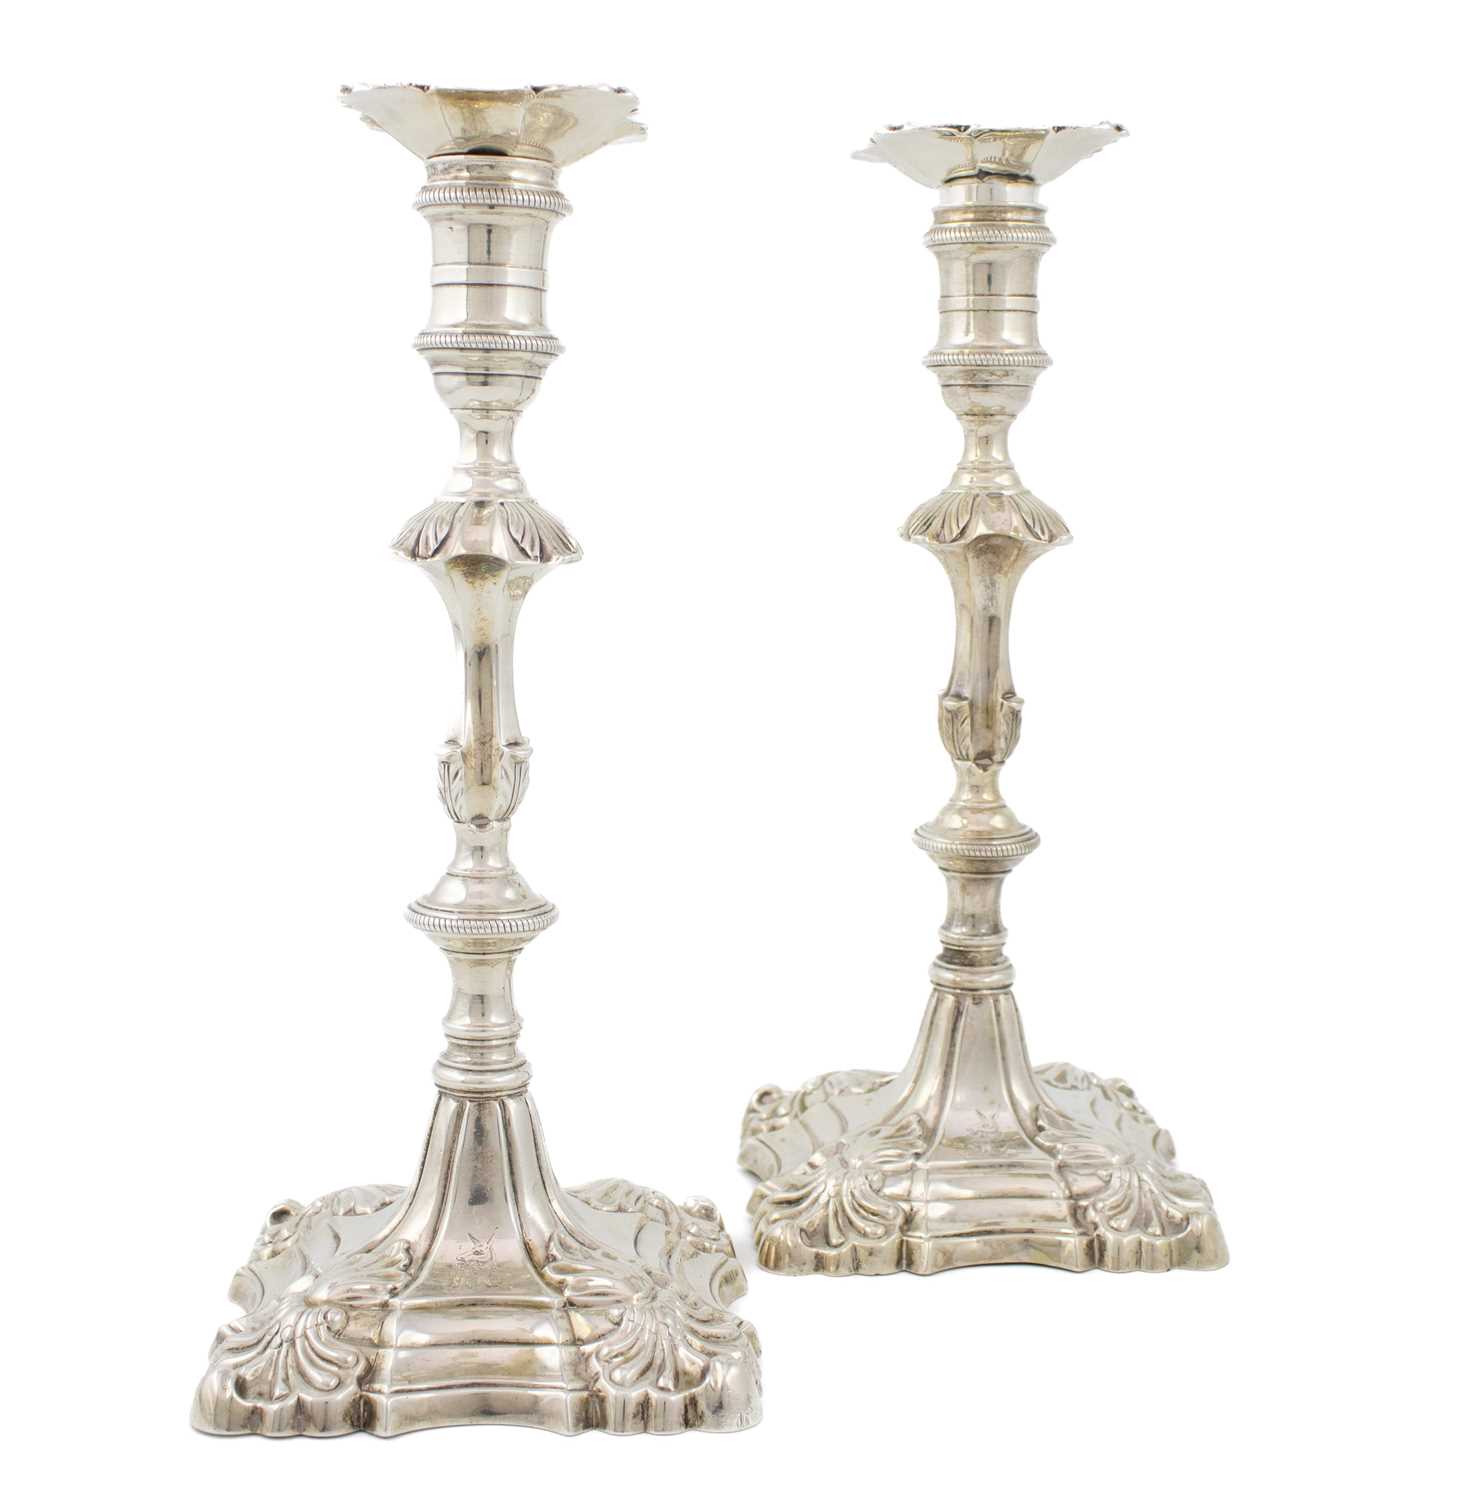 A pair of George III silver candlesticks, by William Cafe, London 1766, knopped tapering stem,